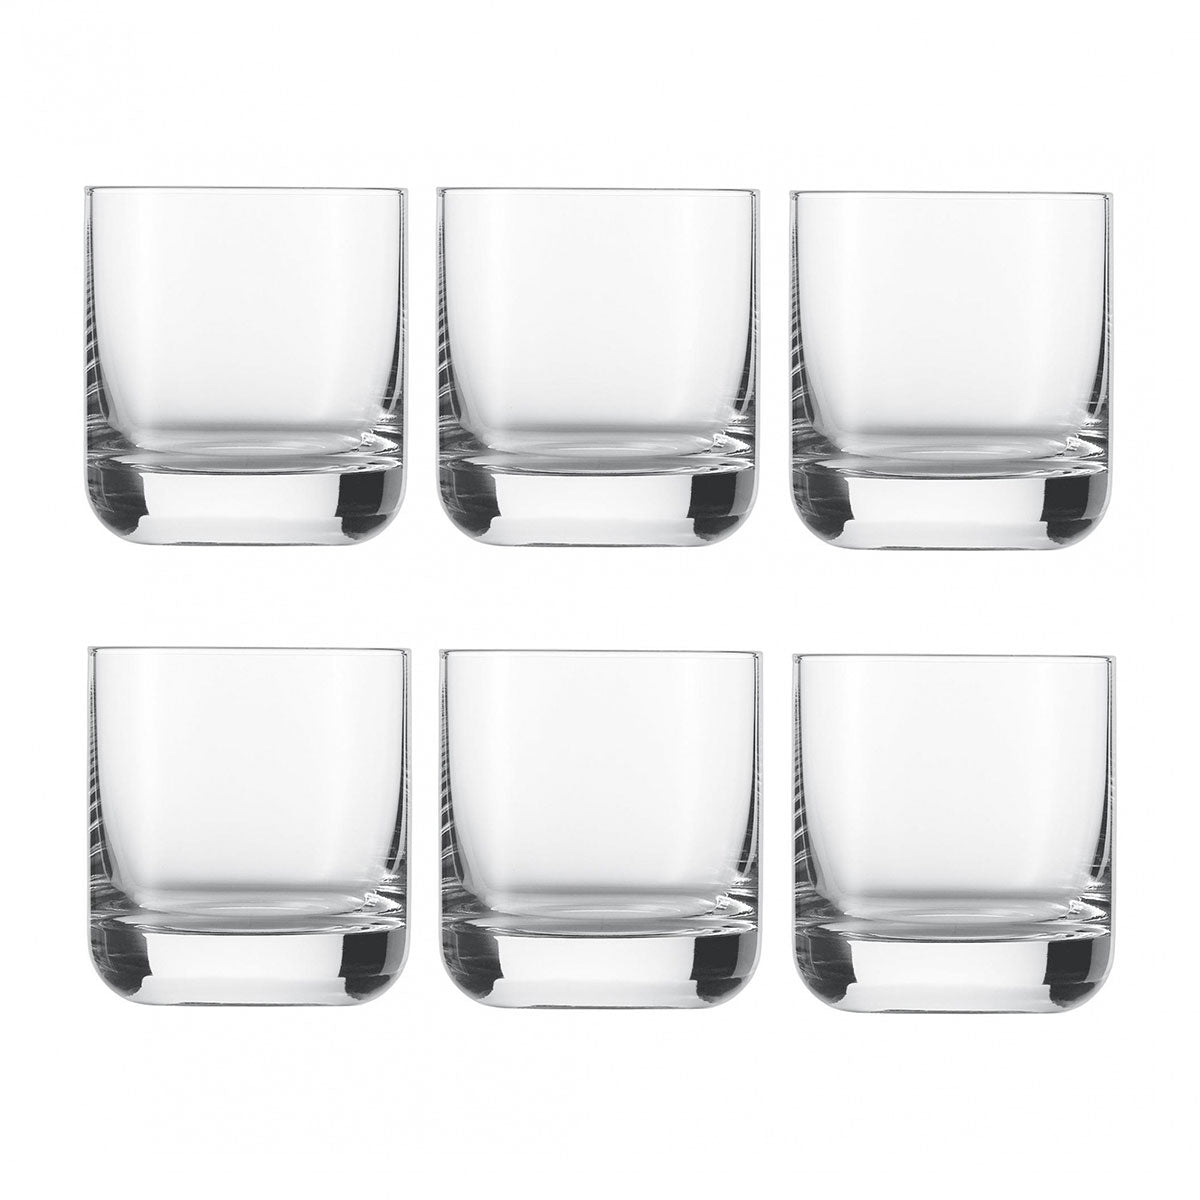 Buy Schott Zwiesel Convention Whisky Tumbler pcs) Wines Singapore